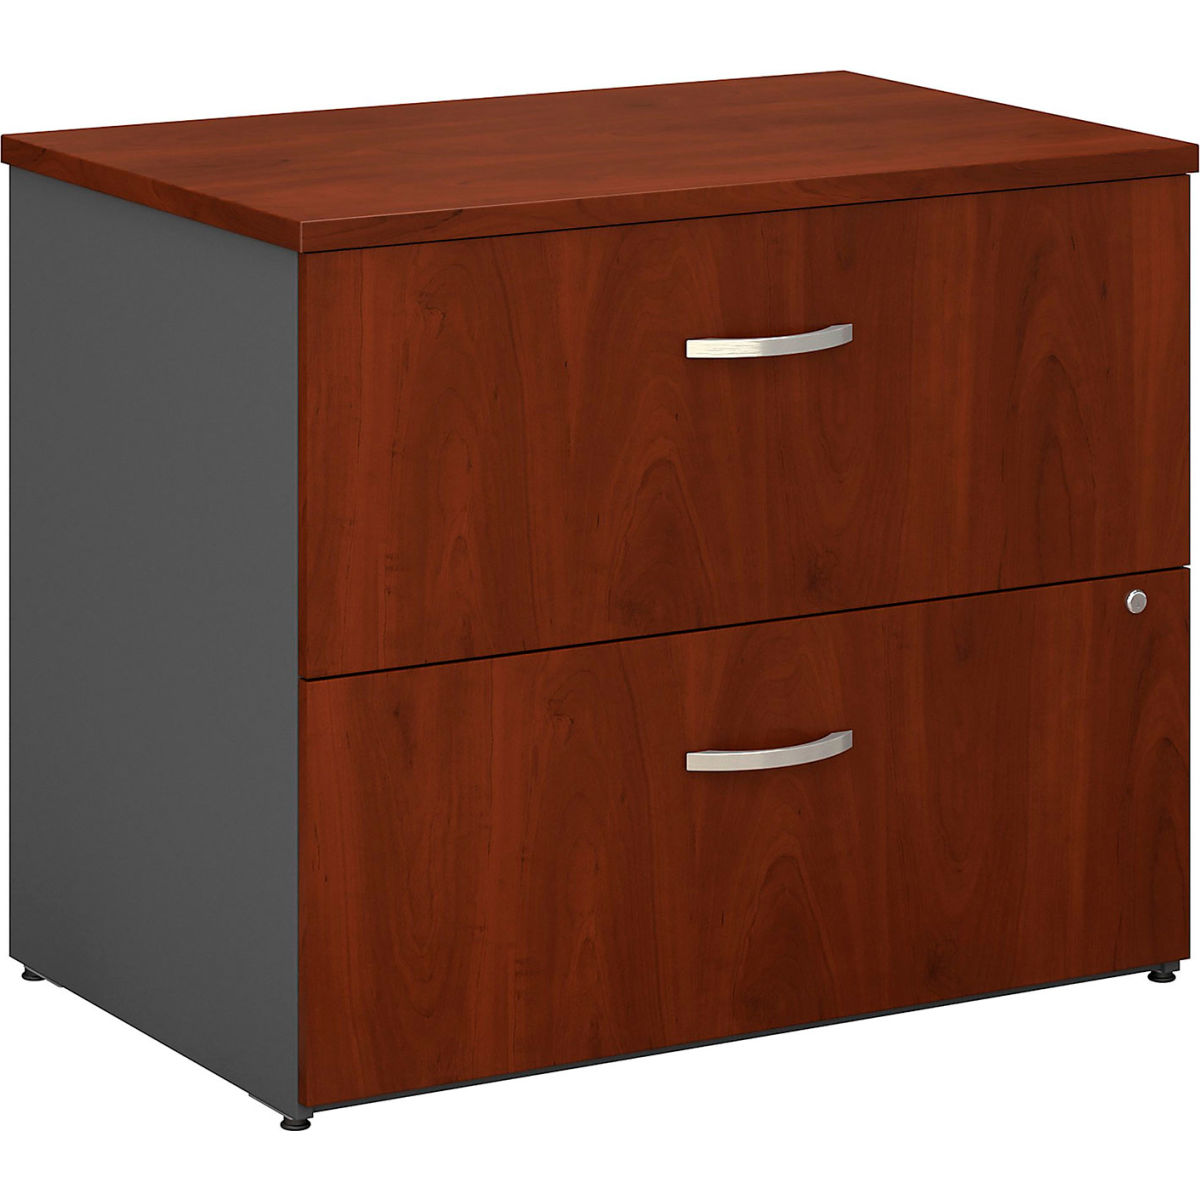 773277DC Series C 2 Drawer Lateral File Cabinet with Double Handle Pulls - Hansen Cherry -  Bush Industries